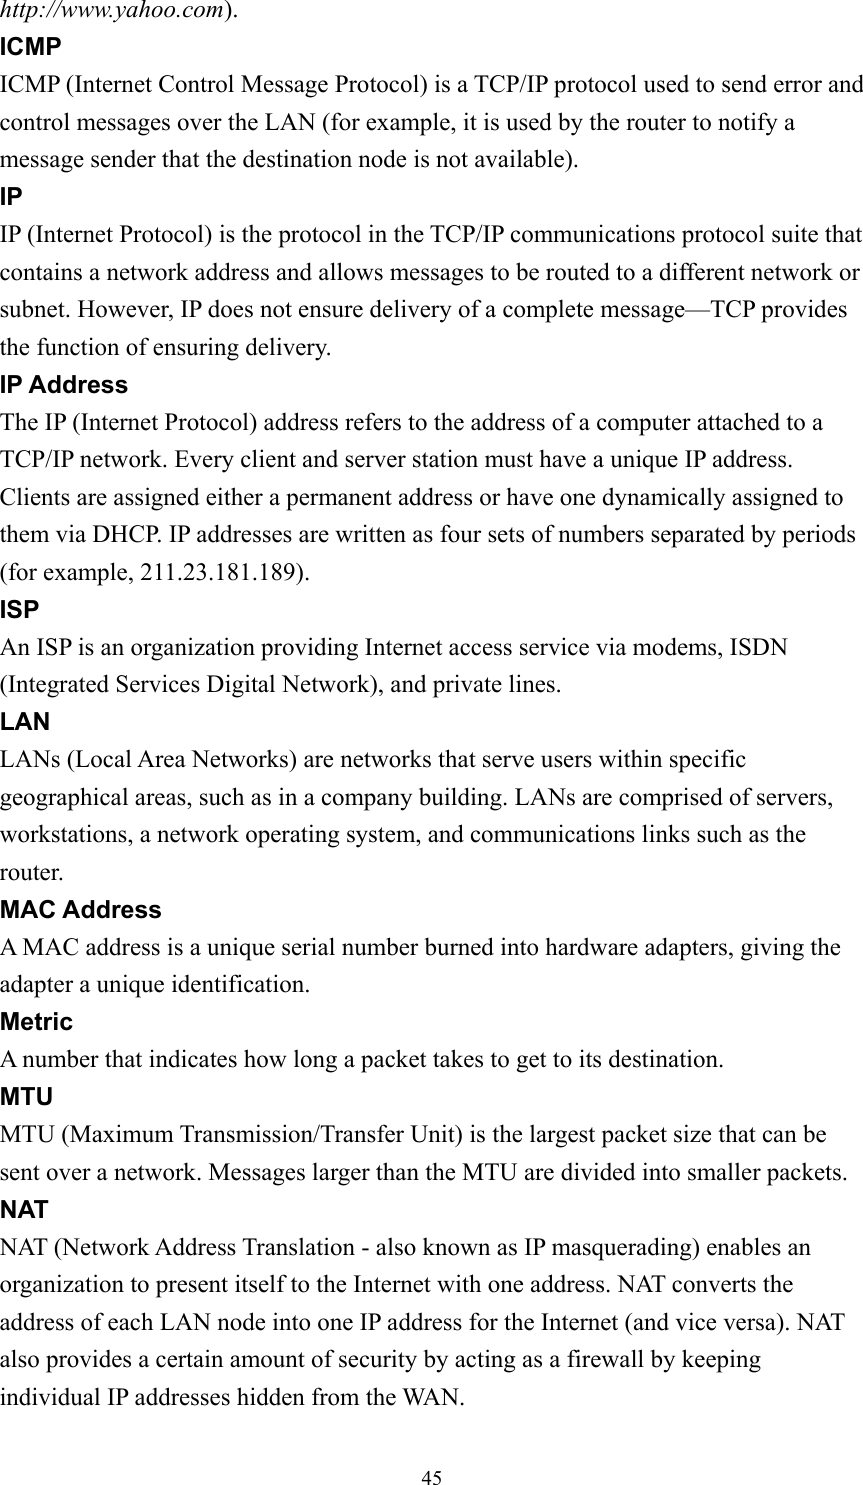  45http://www.yahoo.com). ICMP ICMP (Internet Control Message Protocol) is a TCP/IP protocol used to send error and control messages over the LAN (for example, it is used by the router to notify a message sender that the destination node is not available). IP IP (Internet Protocol) is the protocol in the TCP/IP communications protocol suite that contains a network address and allows messages to be routed to a different network or subnet. However, IP does not ensure delivery of a complete message—TCP provides the function of ensuring delivery. IP Address The IP (Internet Protocol) address refers to the address of a computer attached to a TCP/IP network. Every client and server station must have a unique IP address. Clients are assigned either a permanent address or have one dynamically assigned to them via DHCP. IP addresses are written as four sets of numbers separated by periods (for example, 211.23.181.189). ISP An ISP is an organization providing Internet access service via modems, ISDN (Integrated Services Digital Network), and private lines. LAN LANs (Local Area Networks) are networks that serve users within specific geographical areas, such as in a company building. LANs are comprised of servers, workstations, a network operating system, and communications links such as the router. MAC Address A MAC address is a unique serial number burned into hardware adapters, giving the adapter a unique identification. Metric A number that indicates how long a packet takes to get to its destination. MTU MTU (Maximum Transmission/Transfer Unit) is the largest packet size that can be sent over a network. Messages larger than the MTU are divided into smaller packets. NAT NAT (Network Address Translation - also known as IP masquerading) enables an organization to present itself to the Internet with one address. NAT converts the address of each LAN node into one IP address for the Internet (and vice versa). NAT also provides a certain amount of security by acting as a firewall by keeping individual IP addresses hidden from the WAN. 